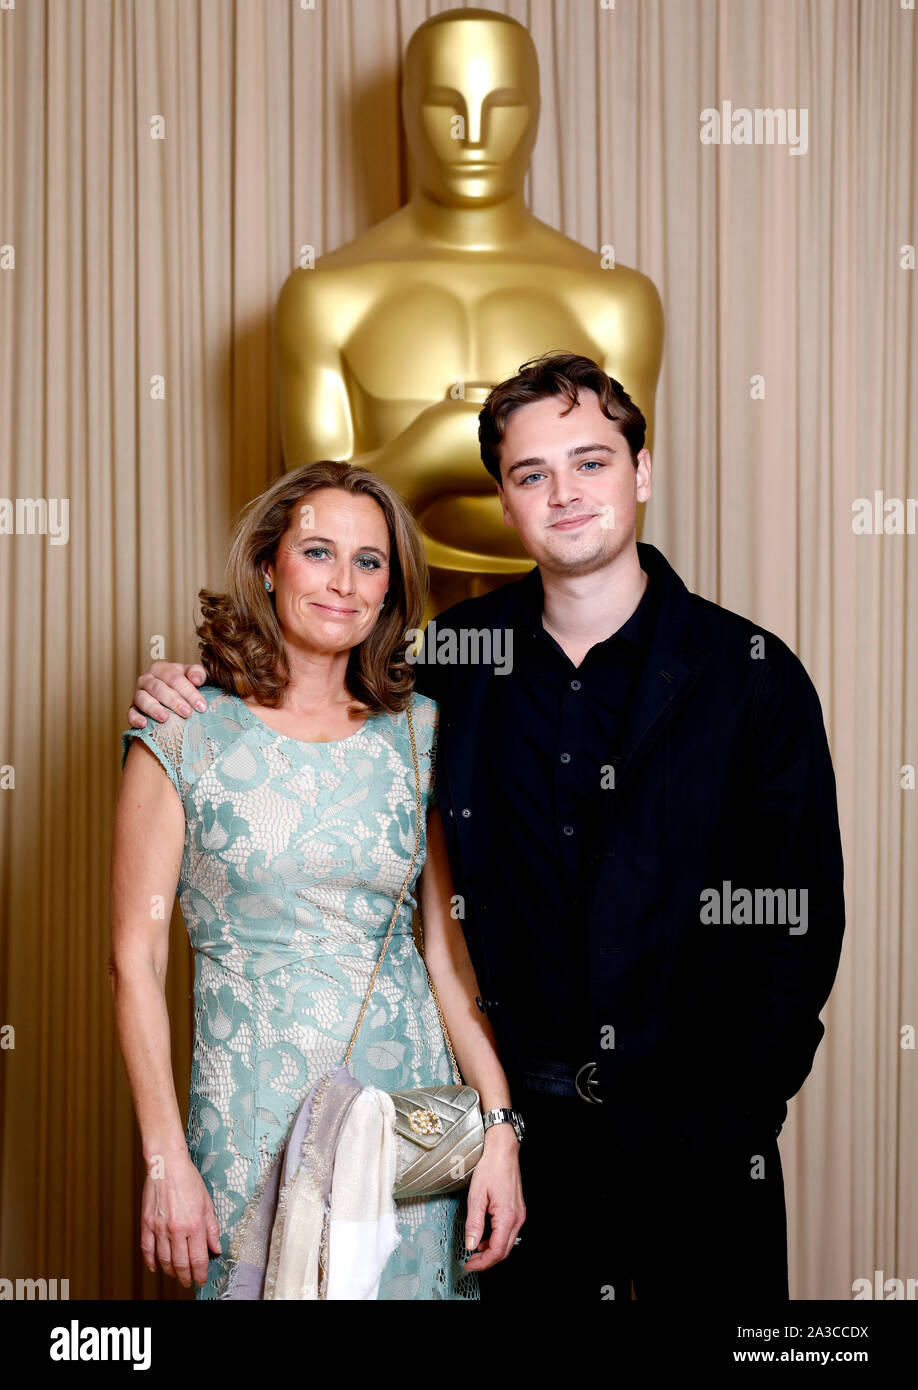 Elizabeth Rebecca Chapman and Dean-Charles Chapman attending the Academy of Motion Picture Arts and Sciences New Members Party 2019 held at the Freemasons Hall in London. Stock Photo